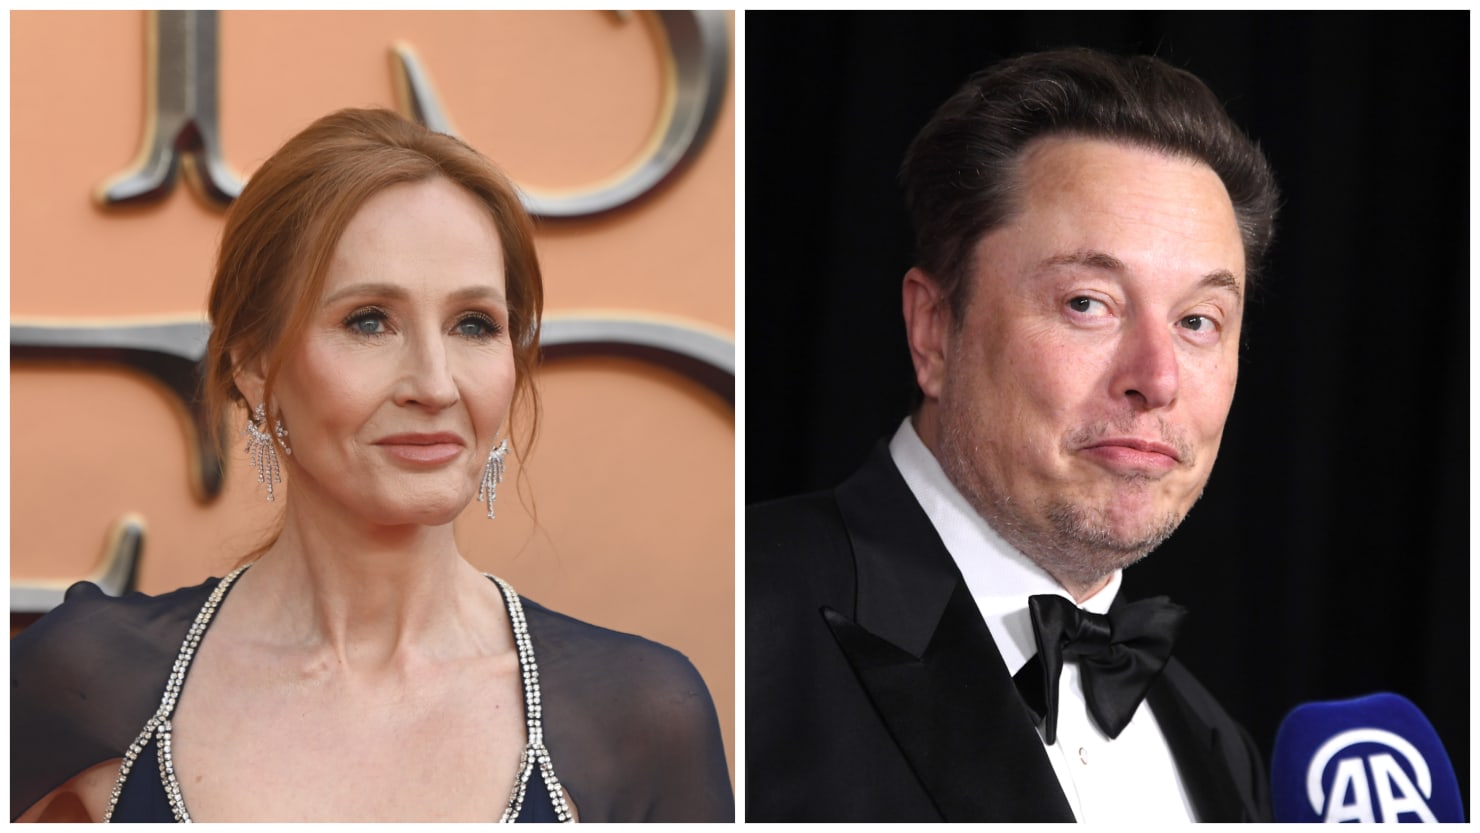 Elon Musk Calls for J.K. Rowling to Shift Focus from Anti-Trans Views